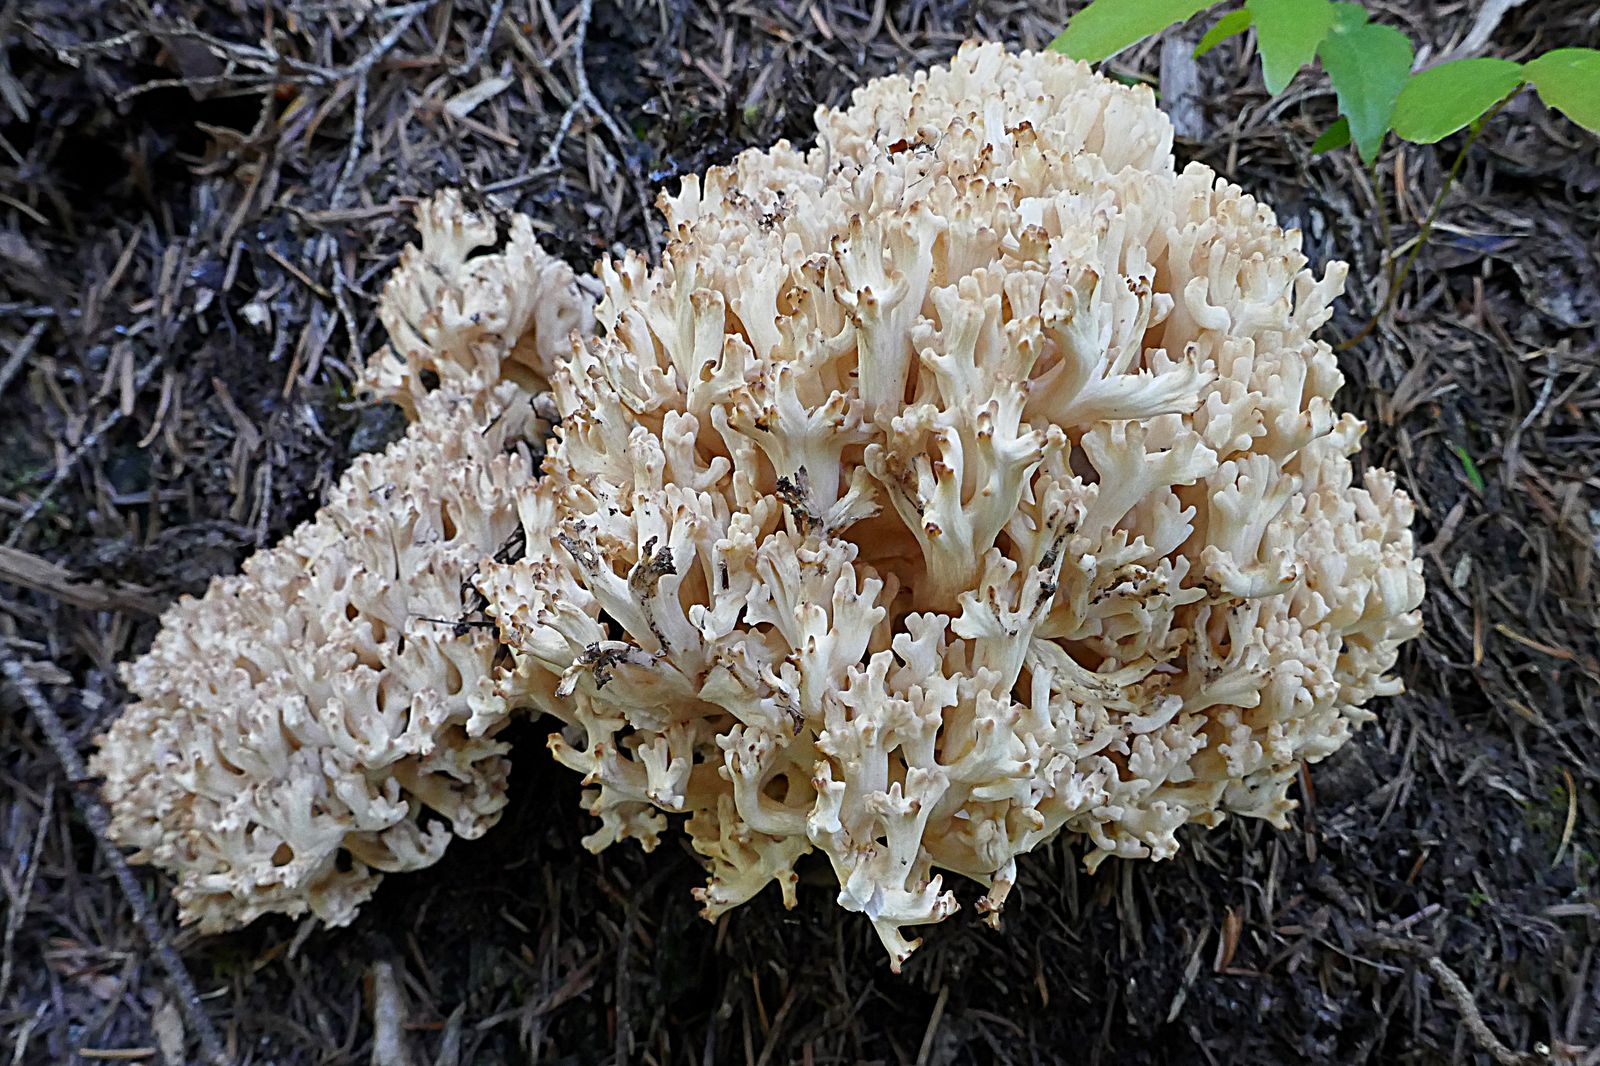  A type of Coral fungi 